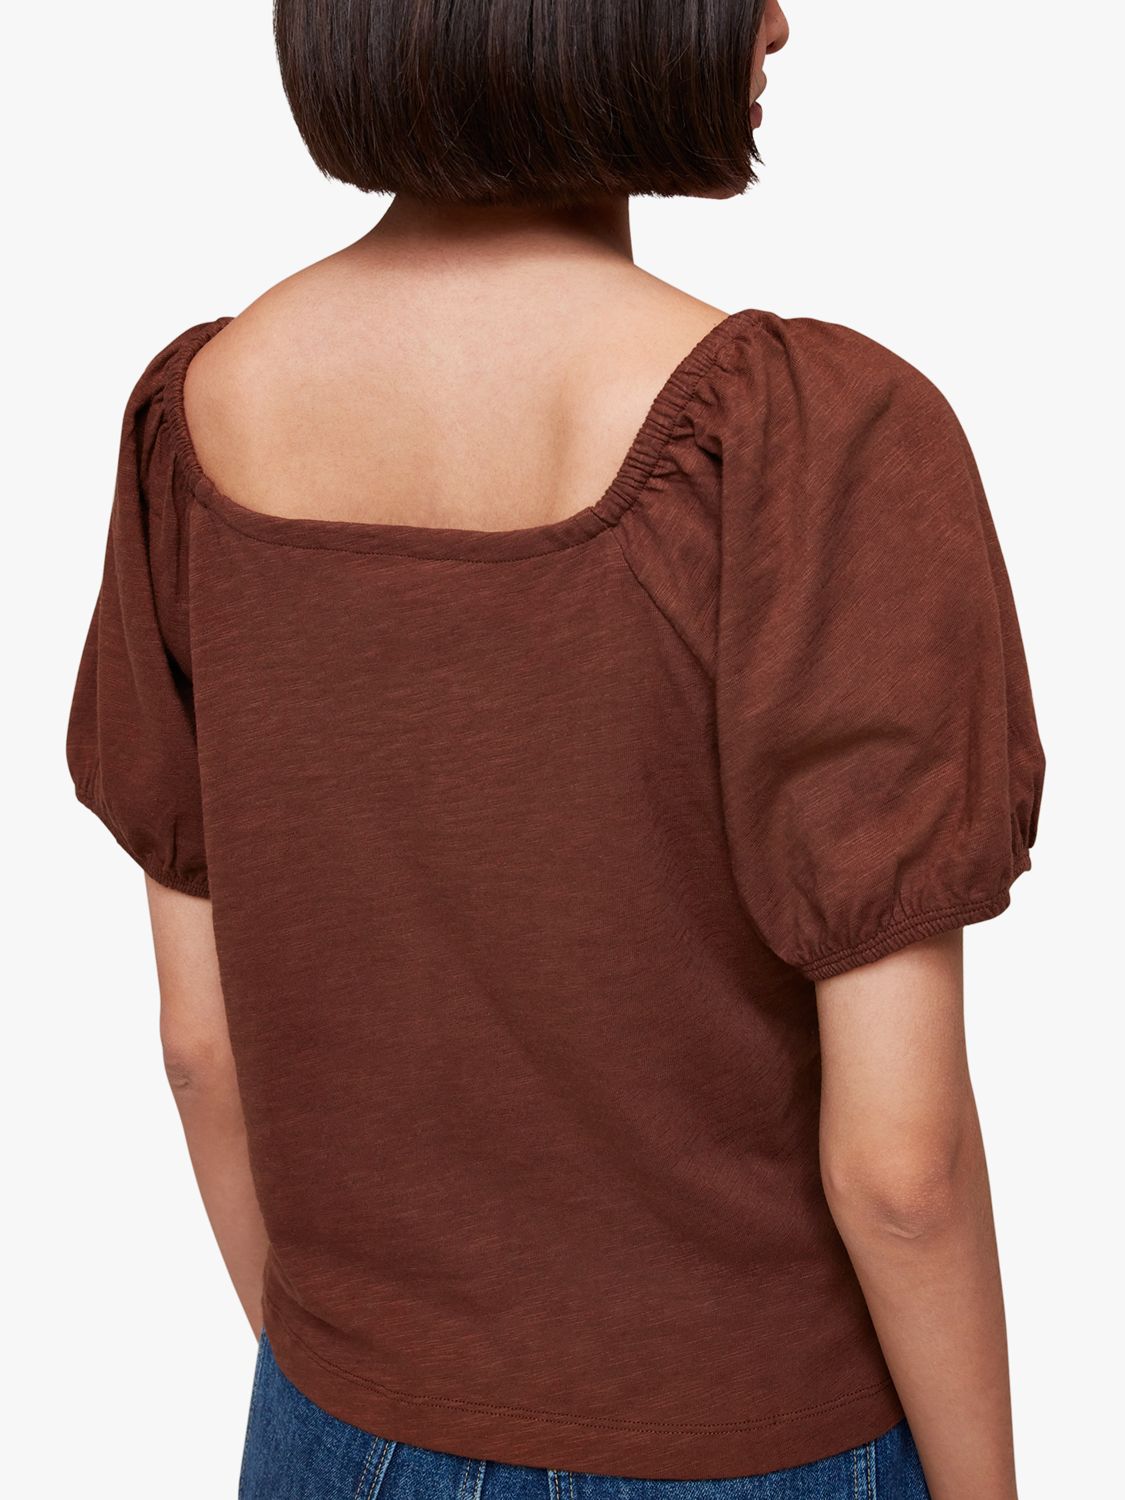 Whistles Square Neck Puff Sleeve Top, Brown, S